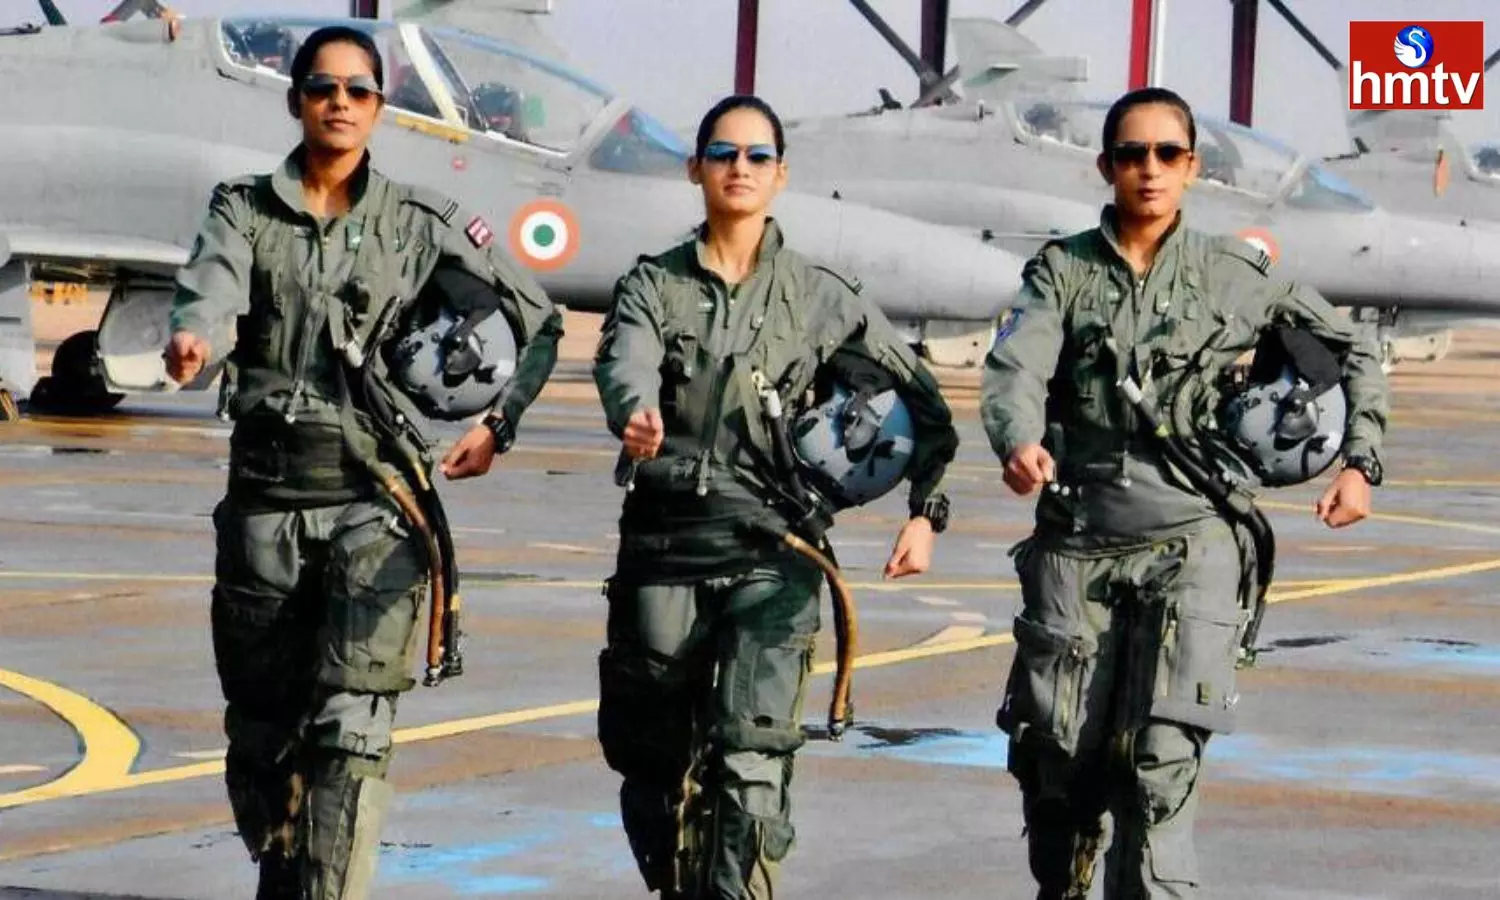 Pilot Career For Adventurous Women Do This To Join Indian Airforce